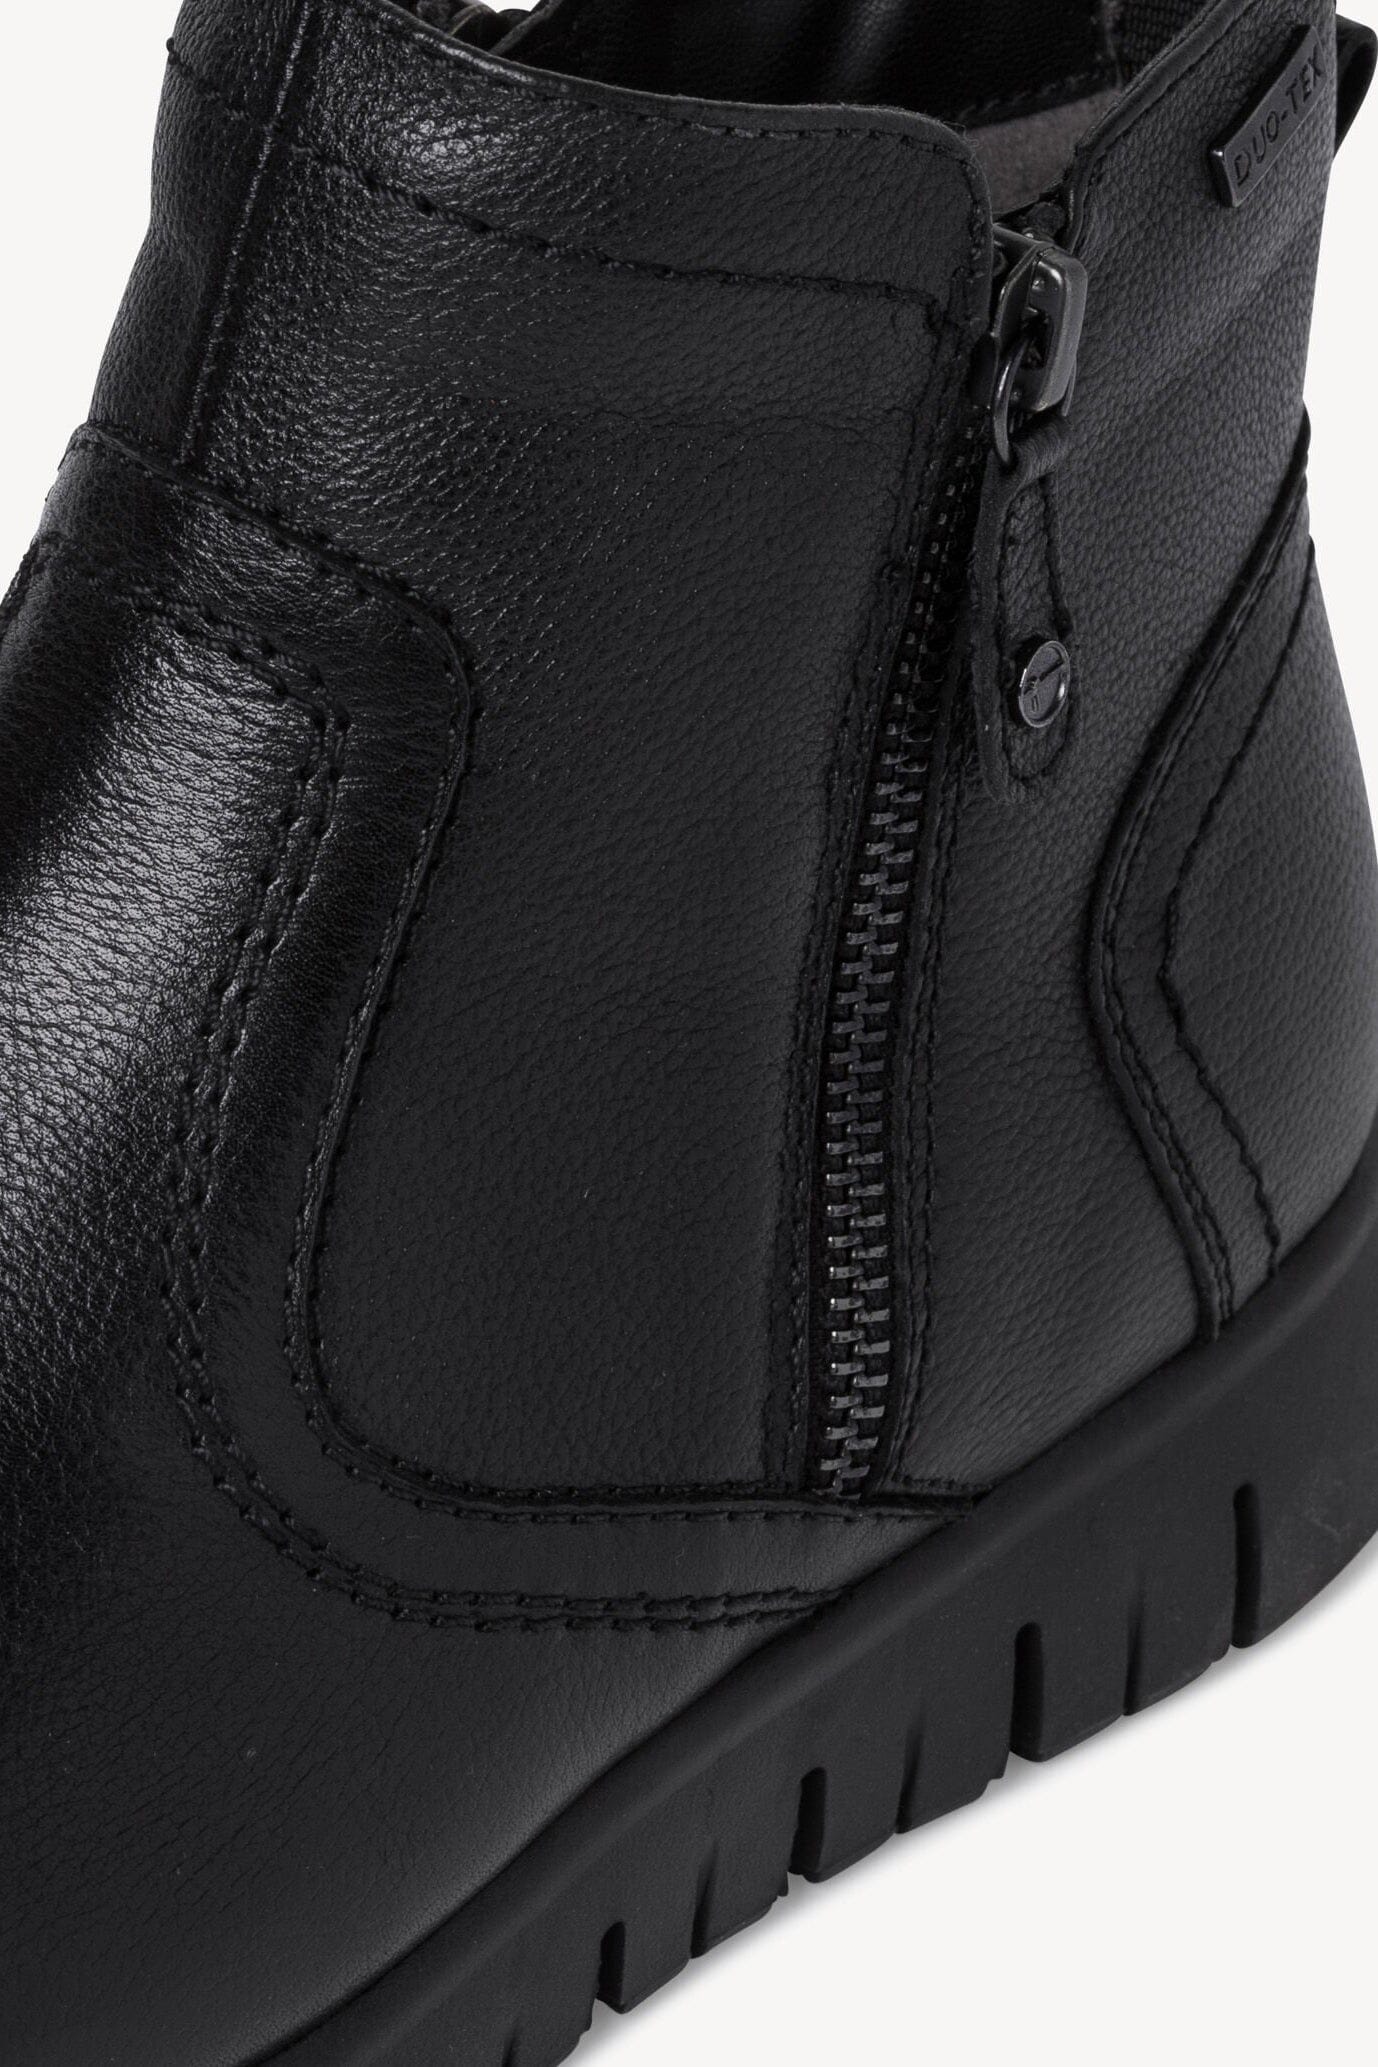 Tamaris Unisex Comfort Duo Tex Ankle Boots Unisex Shoes Shafi Pvt. Limited 